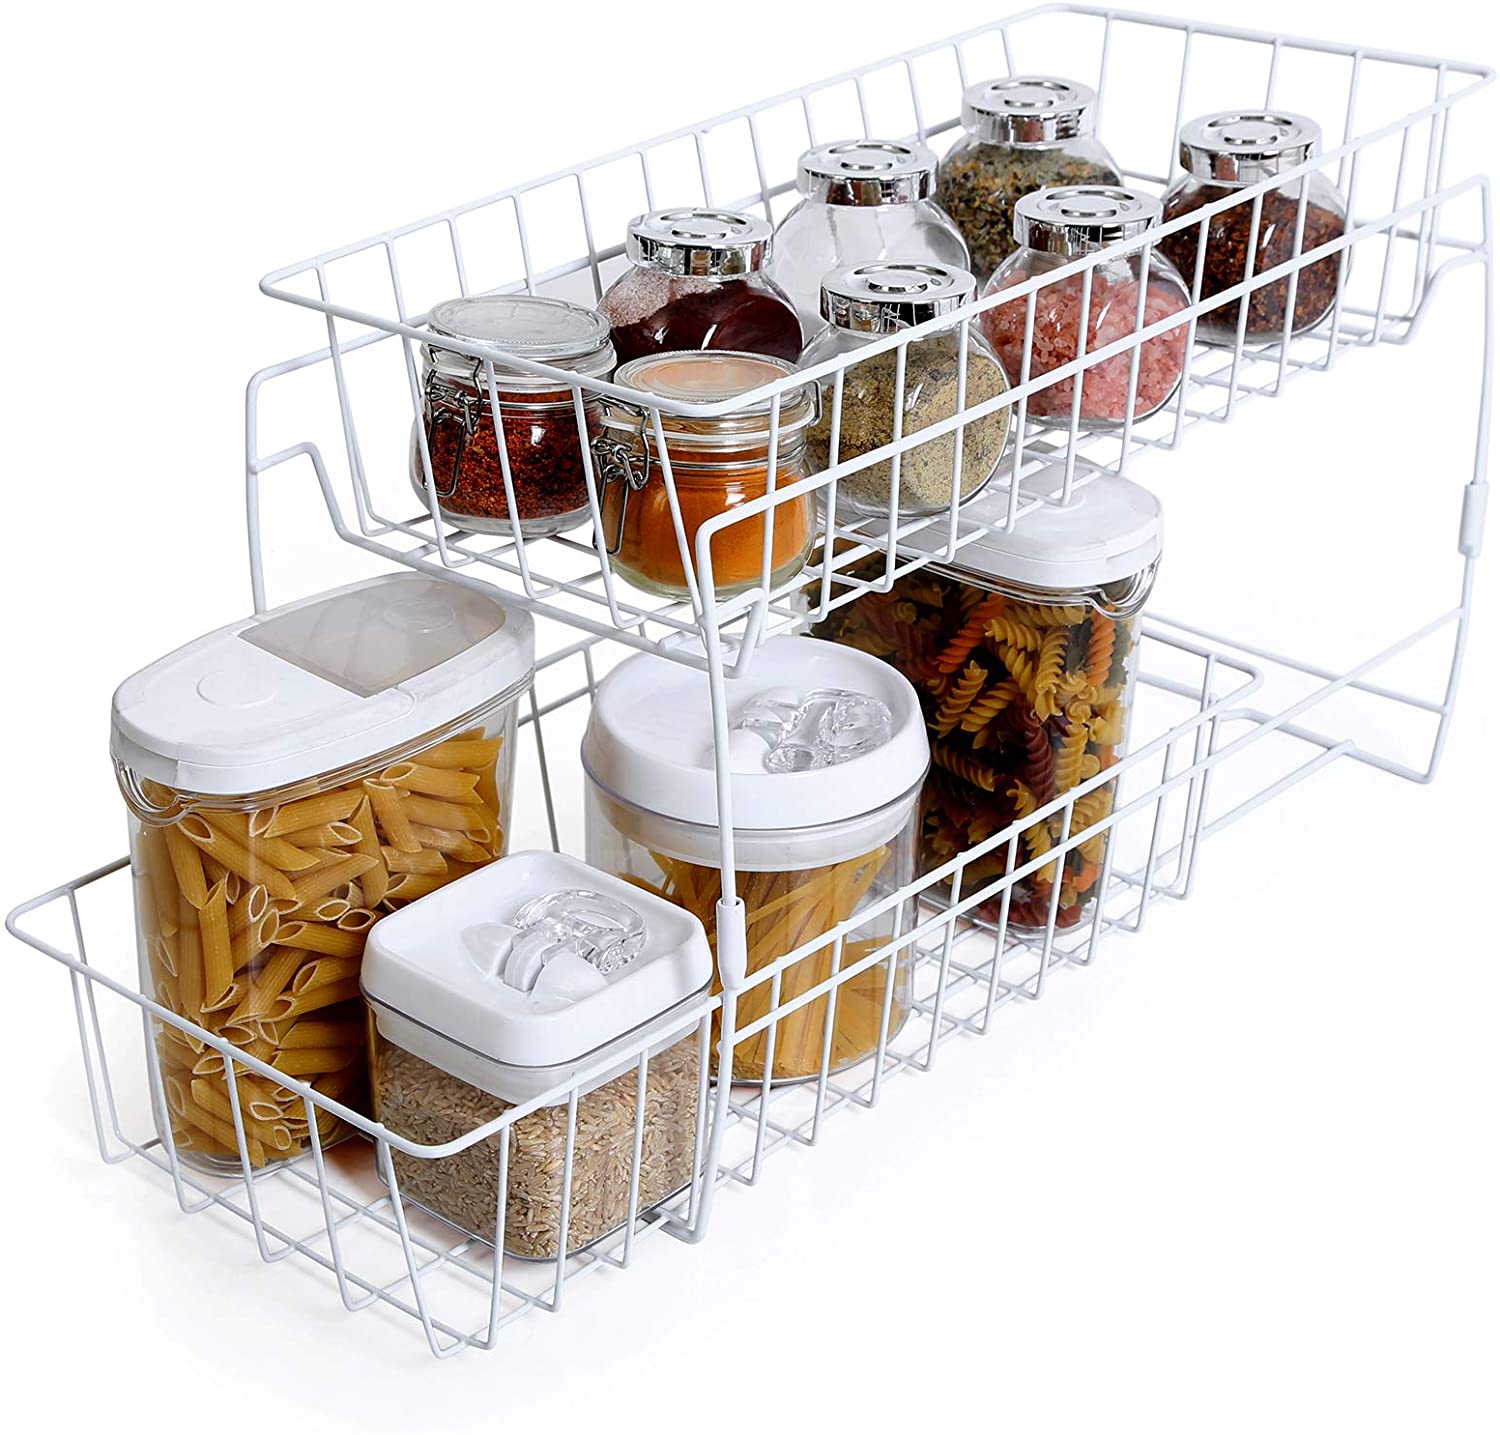 https://cdn.shopify.com/s/files/1/2393/7799/products/2-tier-stackable-pull-out-baskets-white-smart-design-kitchen-8406118-incrementing-number-871950.jpg?v=1679346786